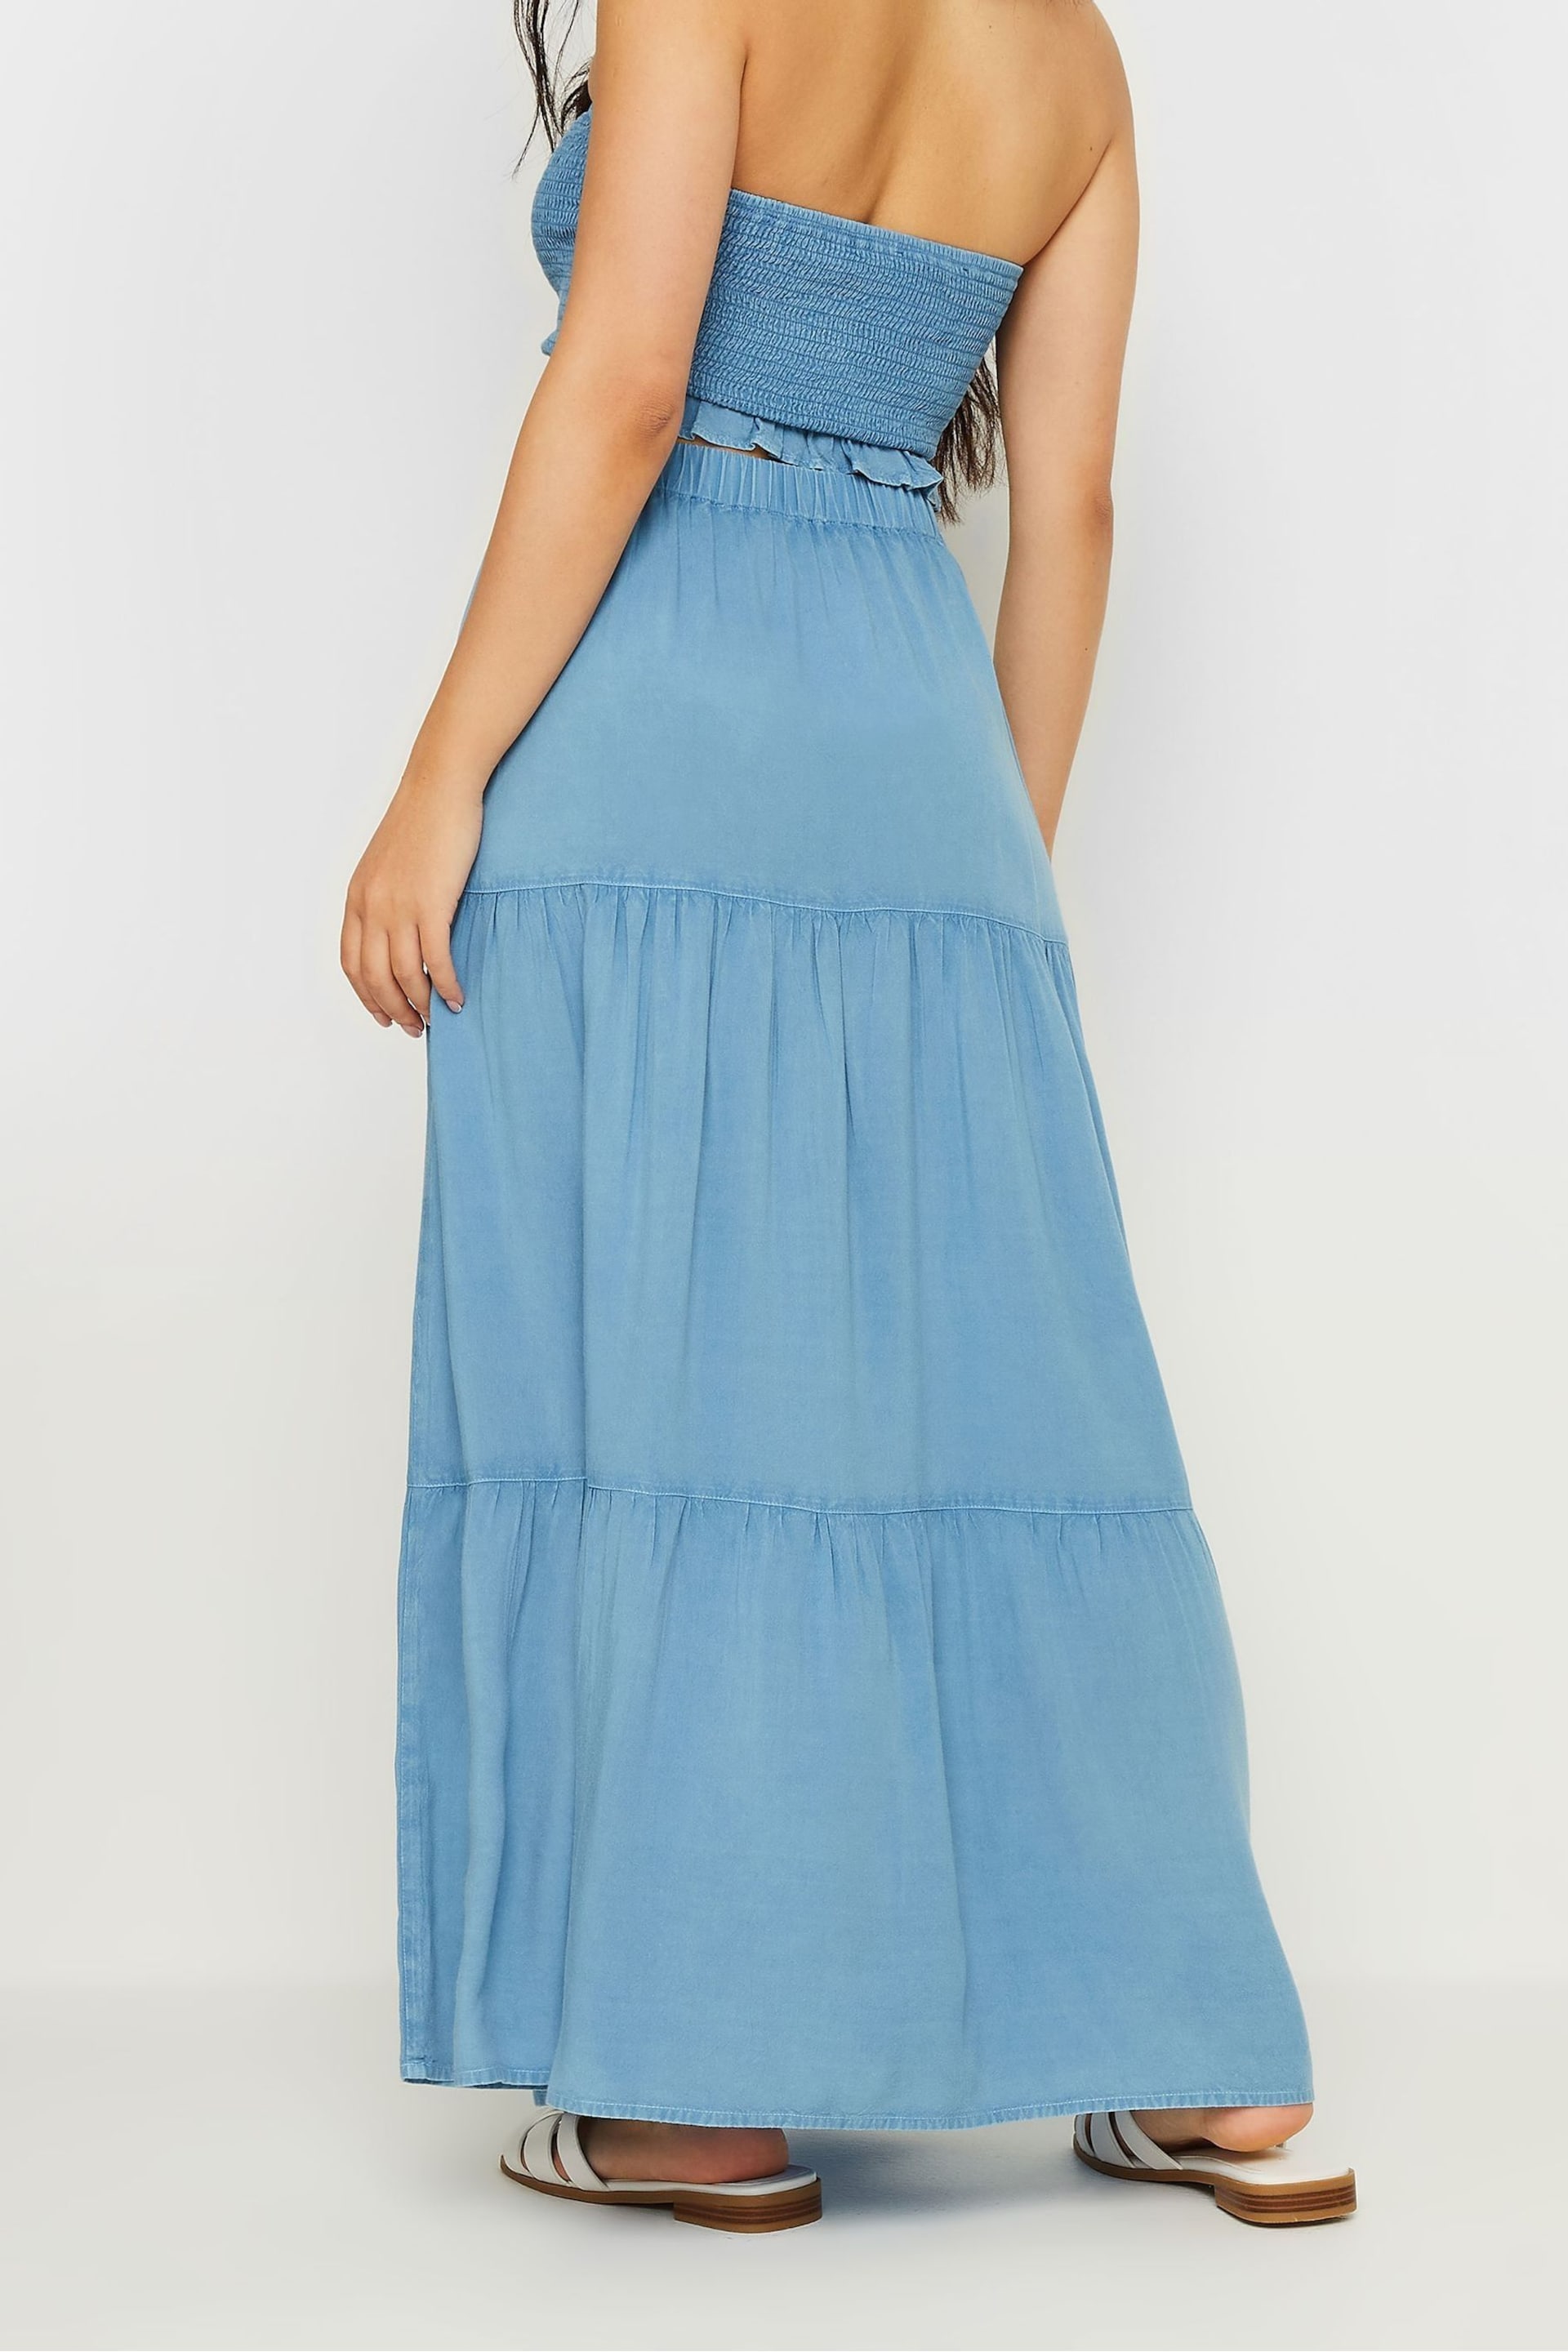 PixieGirl Petite Blue Chambray Tiered Maxi Skirt - Image 3 of 4